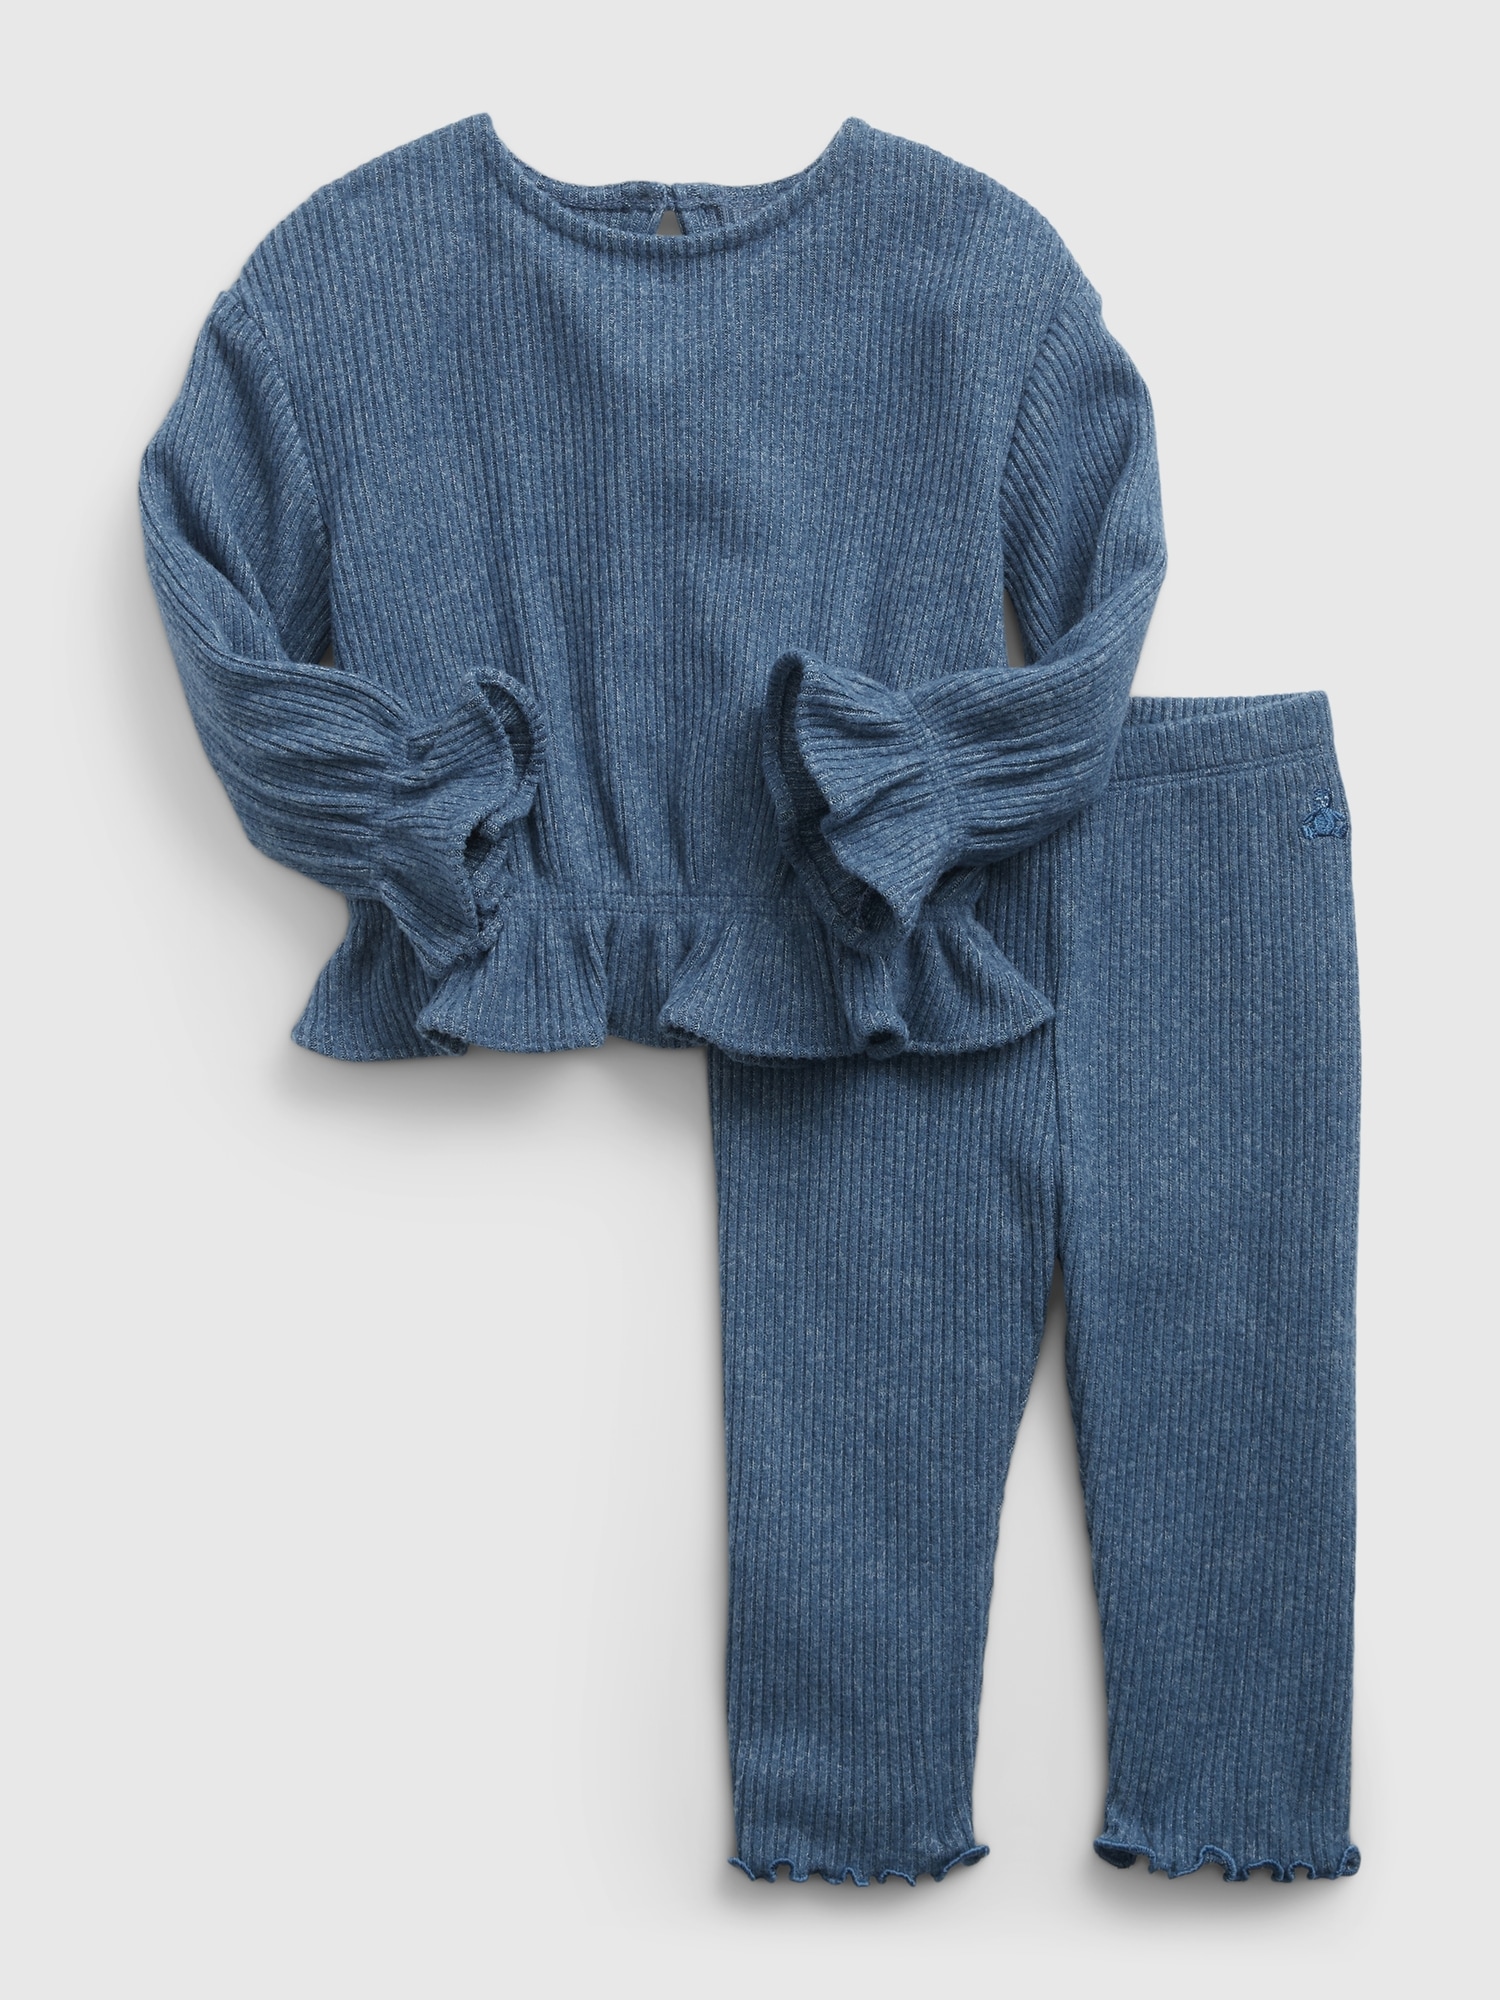 Gap Baby Rib Two-Piece Outfit Set blue. 1